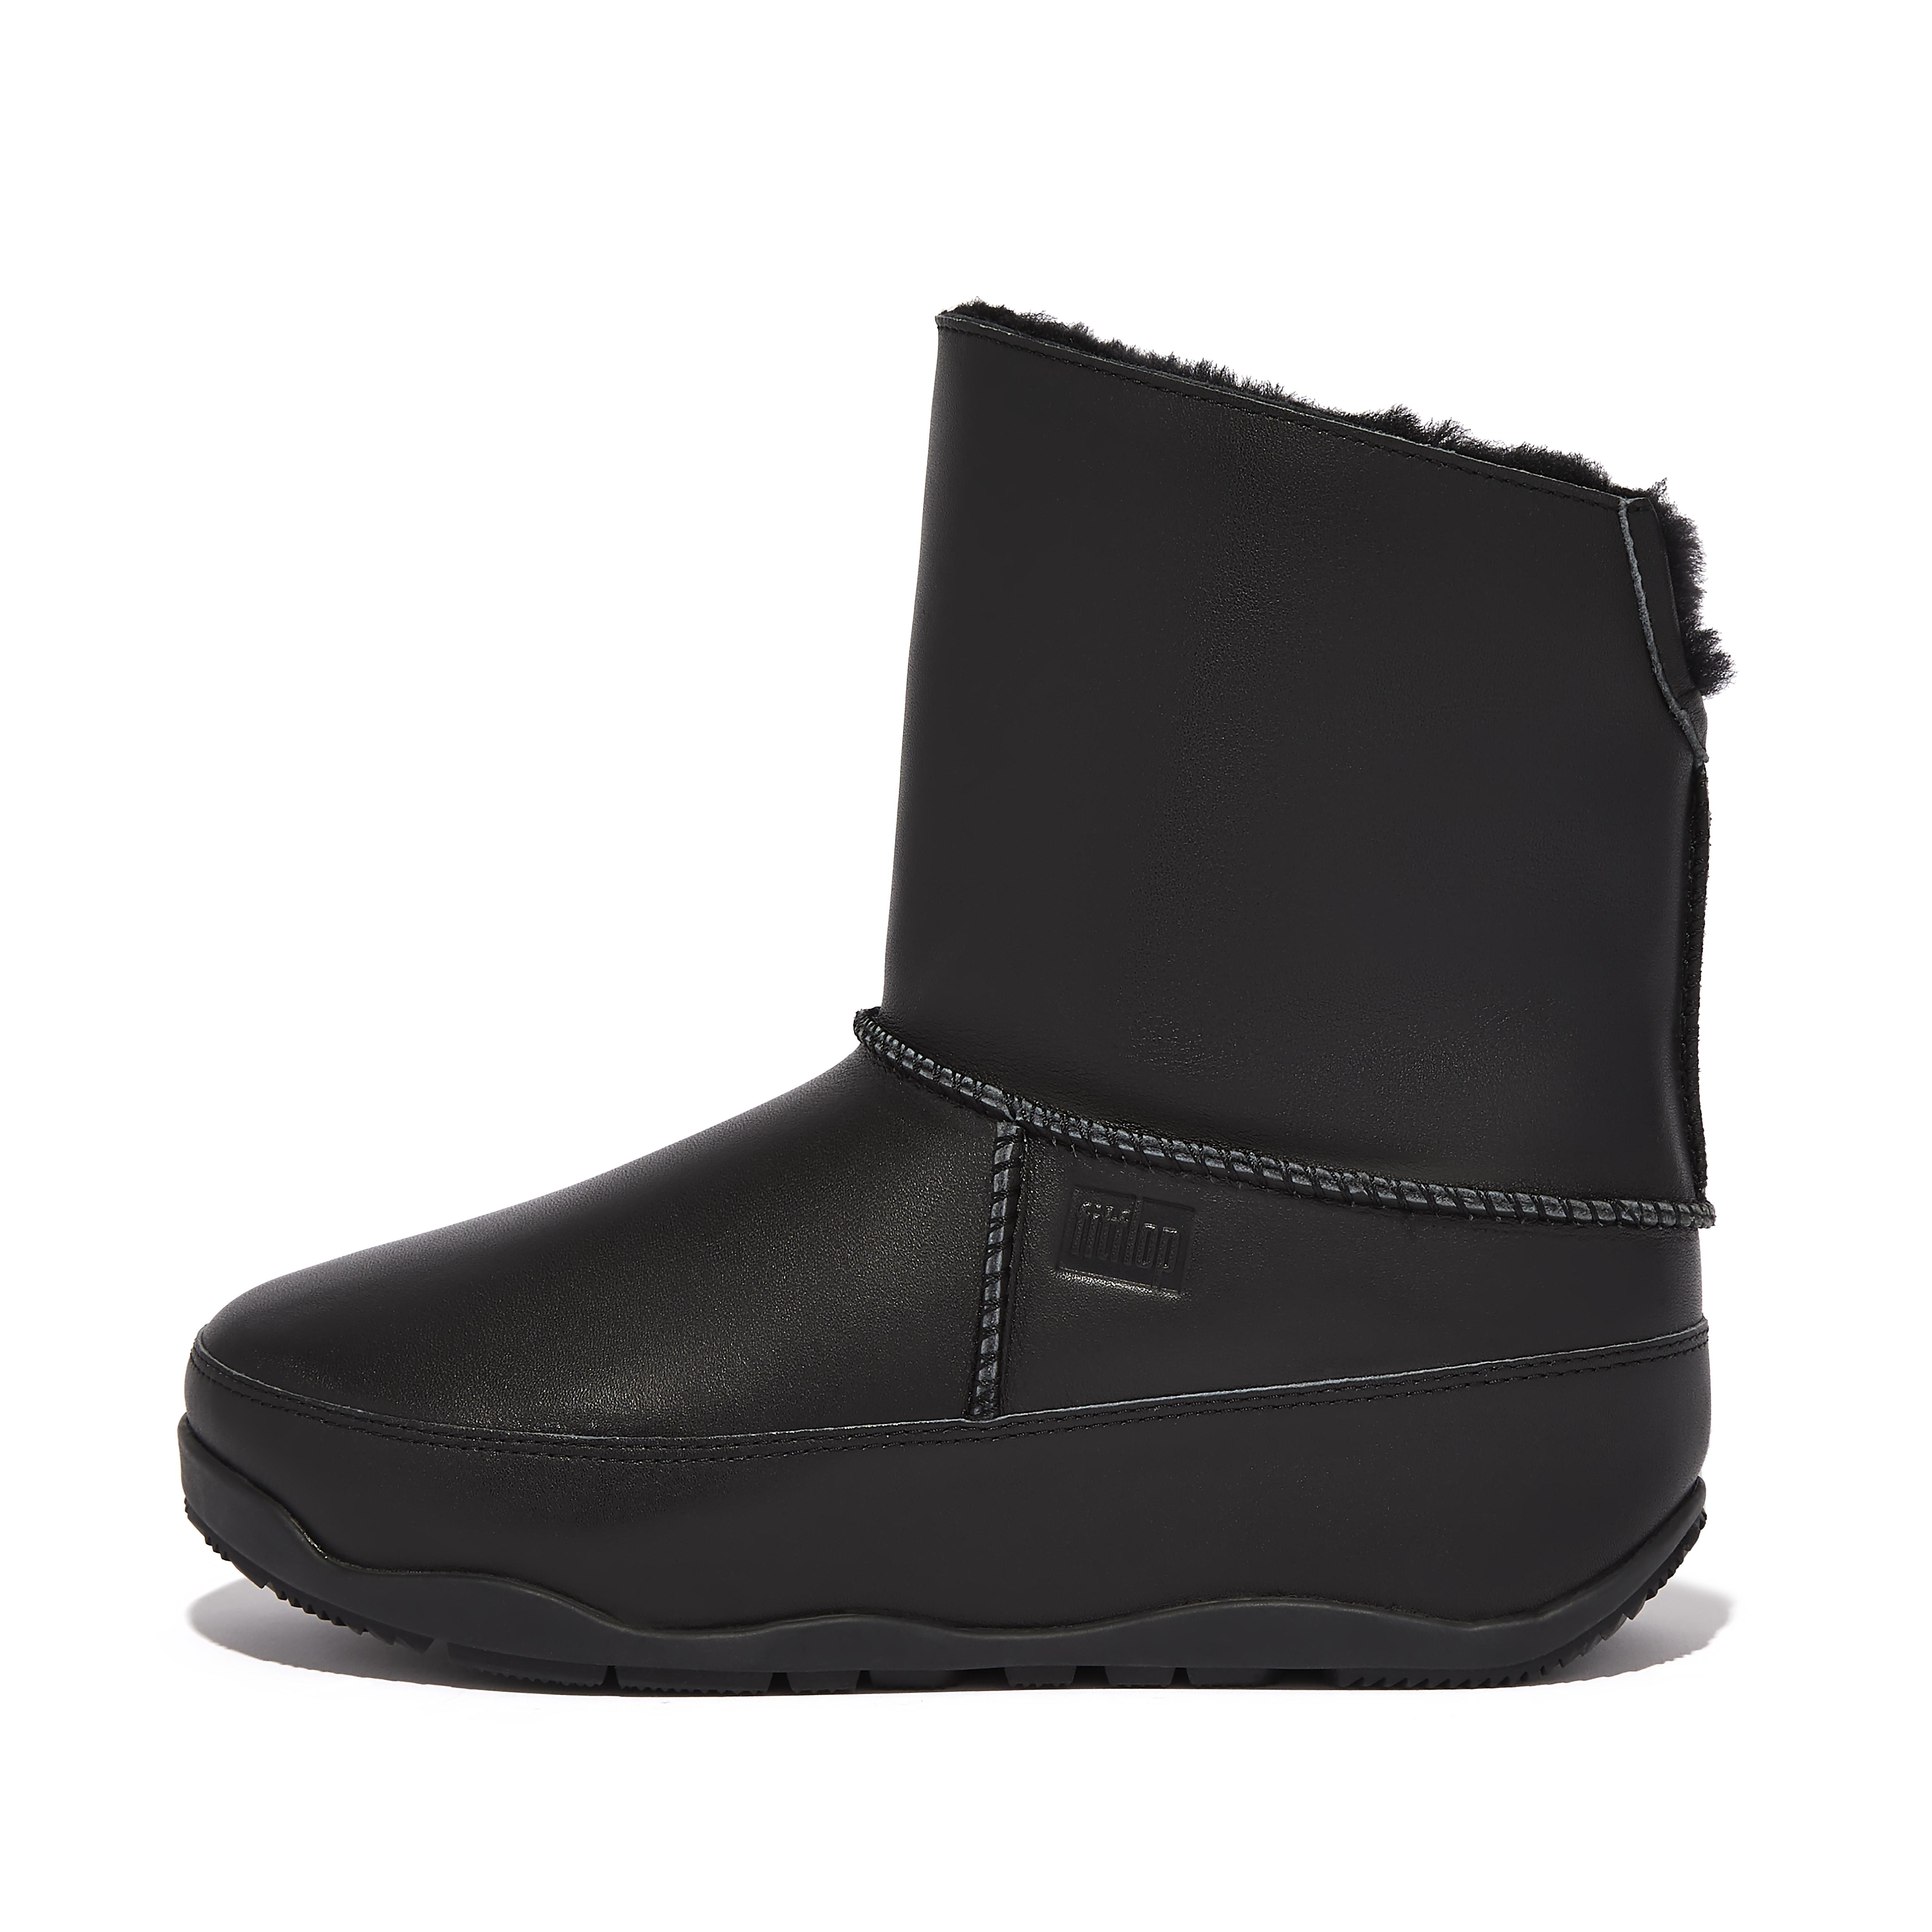 Women's Original Mukluk Leather Ankle Boots | FitFlop EU